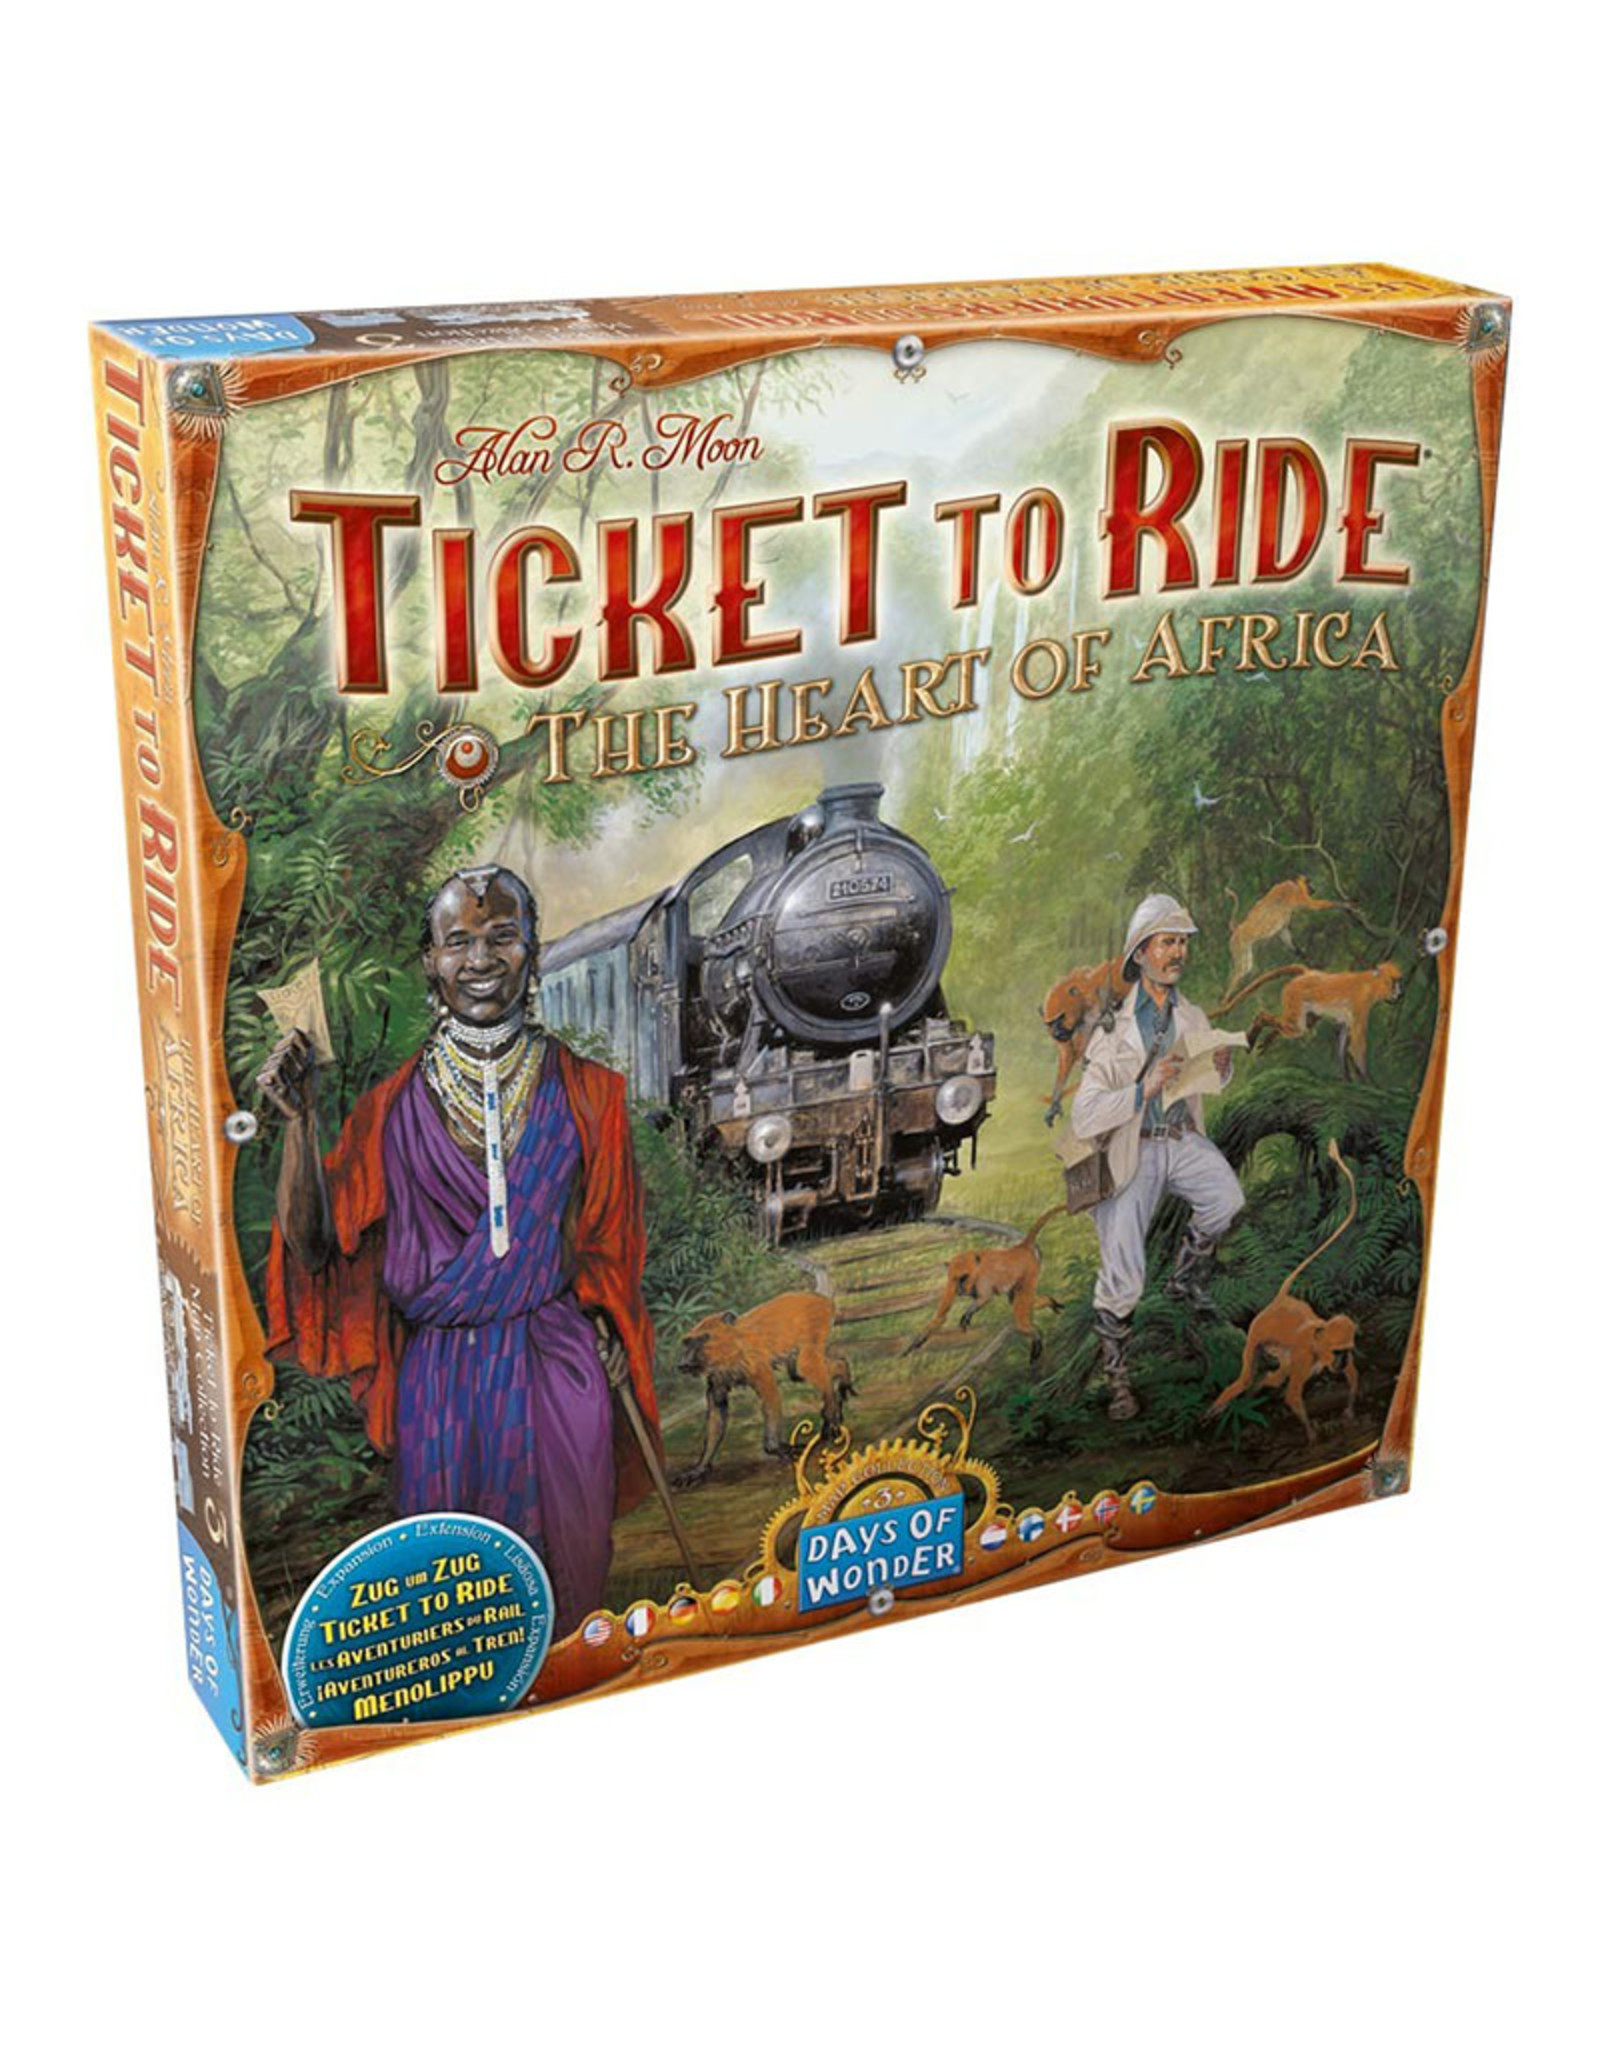 Ticket to Ride Expansion 3 Heart of Africa